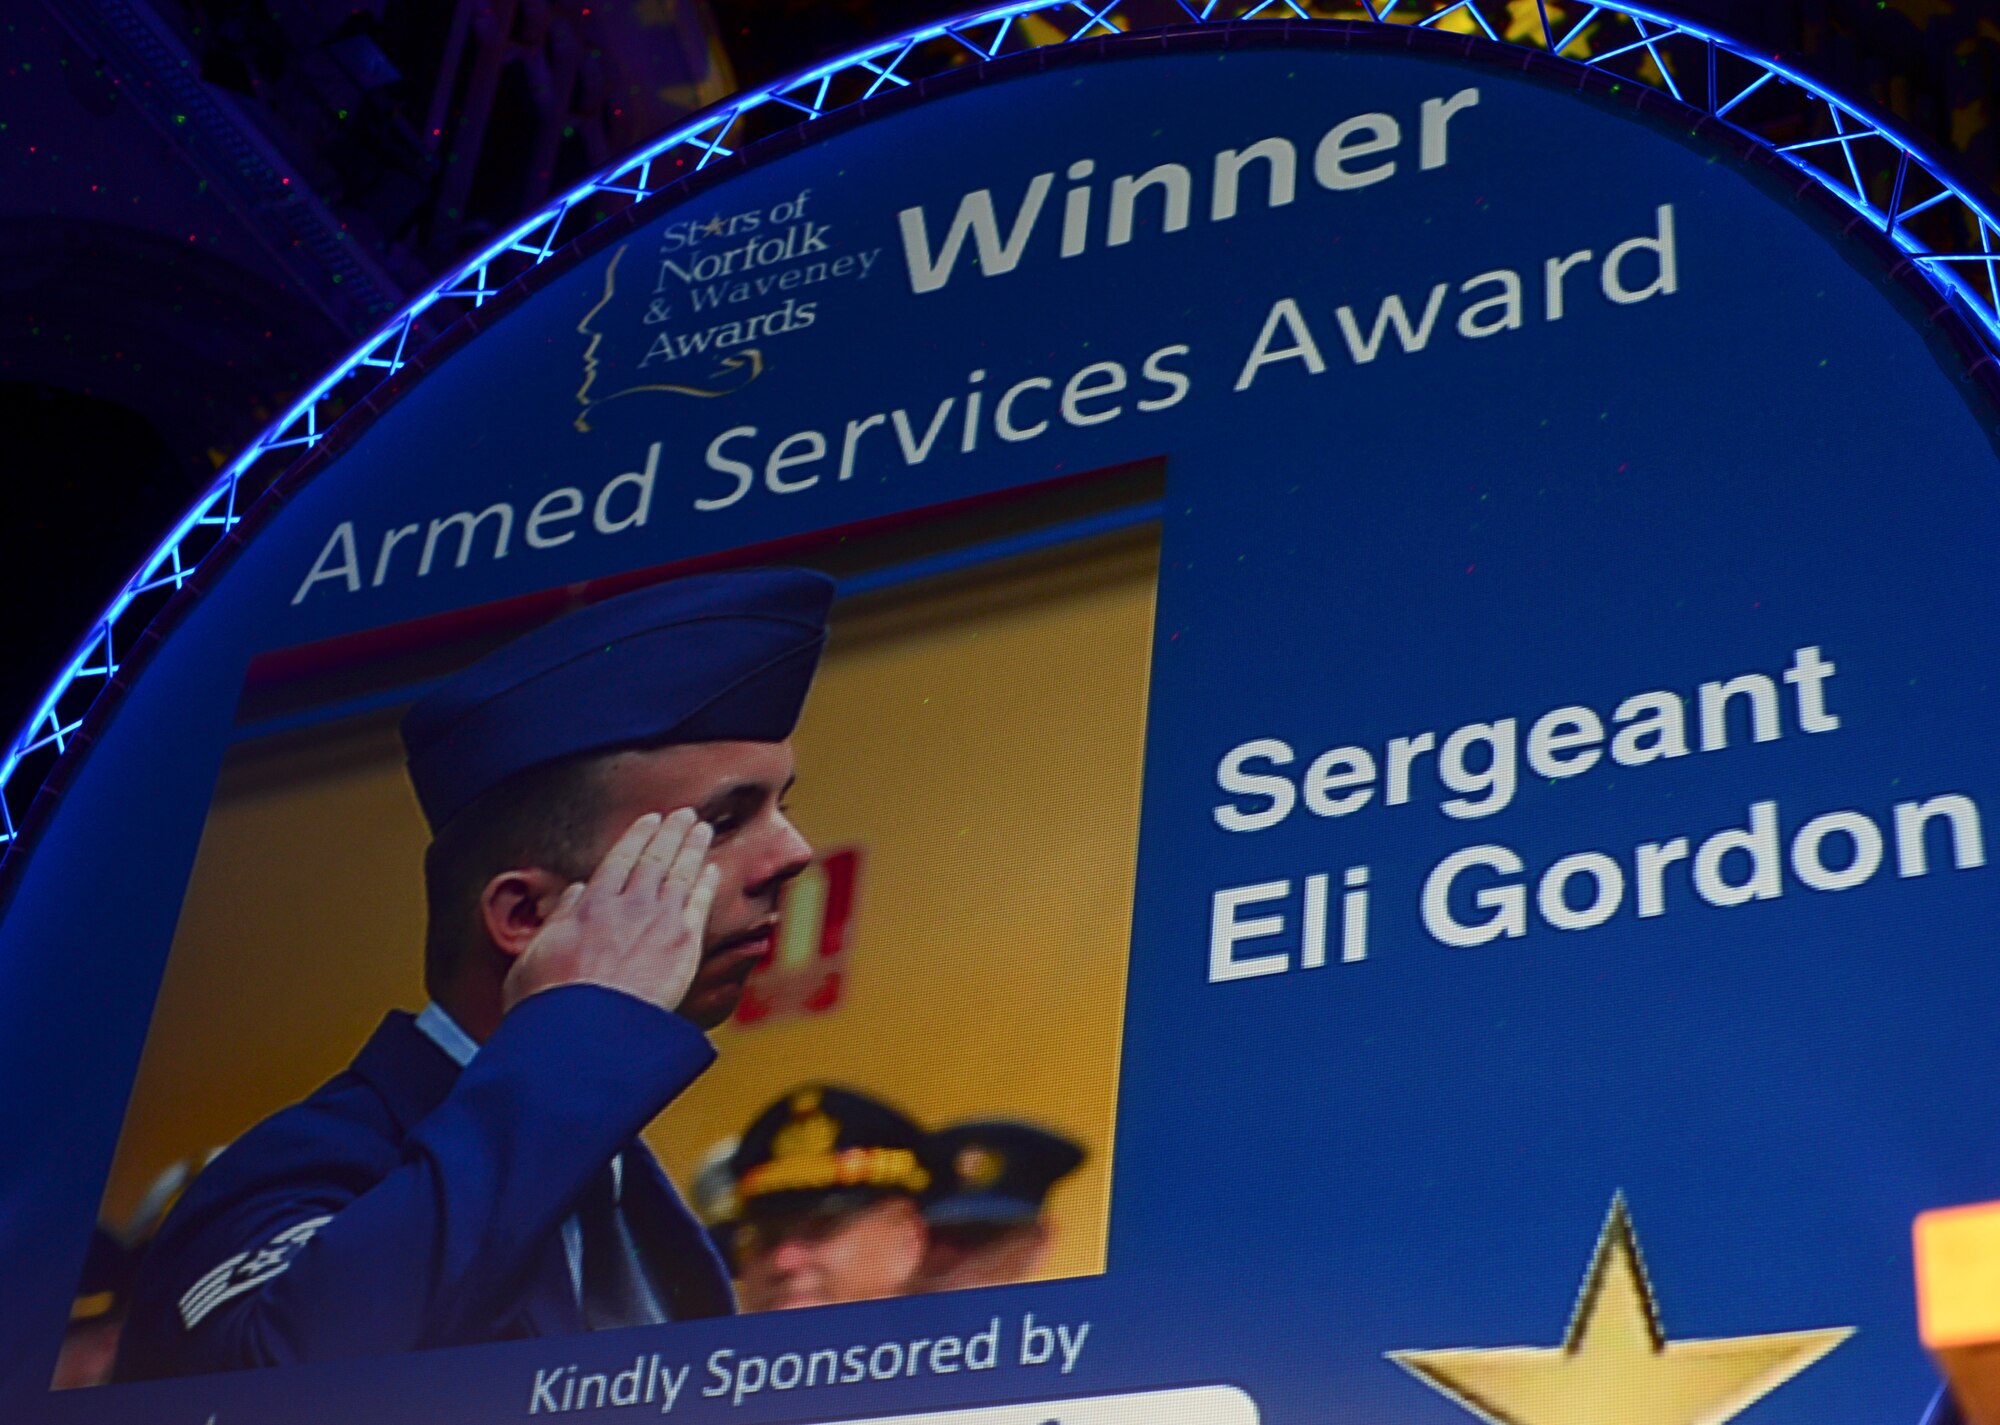 Staff Sgt. Eli Gordon, 492nd Aircraft Maintenance Unit activity security manager, is named the Armed Services Person of the Year award winner during the Stars of Norfolk and Waveney Awards ceremony at St. Andrews Hall, Norfolk, England, Dec. 3, 2015. Gordon was recognized for his heroic actions after a Hellenic air force F-16 crashed during Tactical Leadership Program 15-1 in Spain. (U.S. Air Force photo by Senior Airman Erin Trower) 